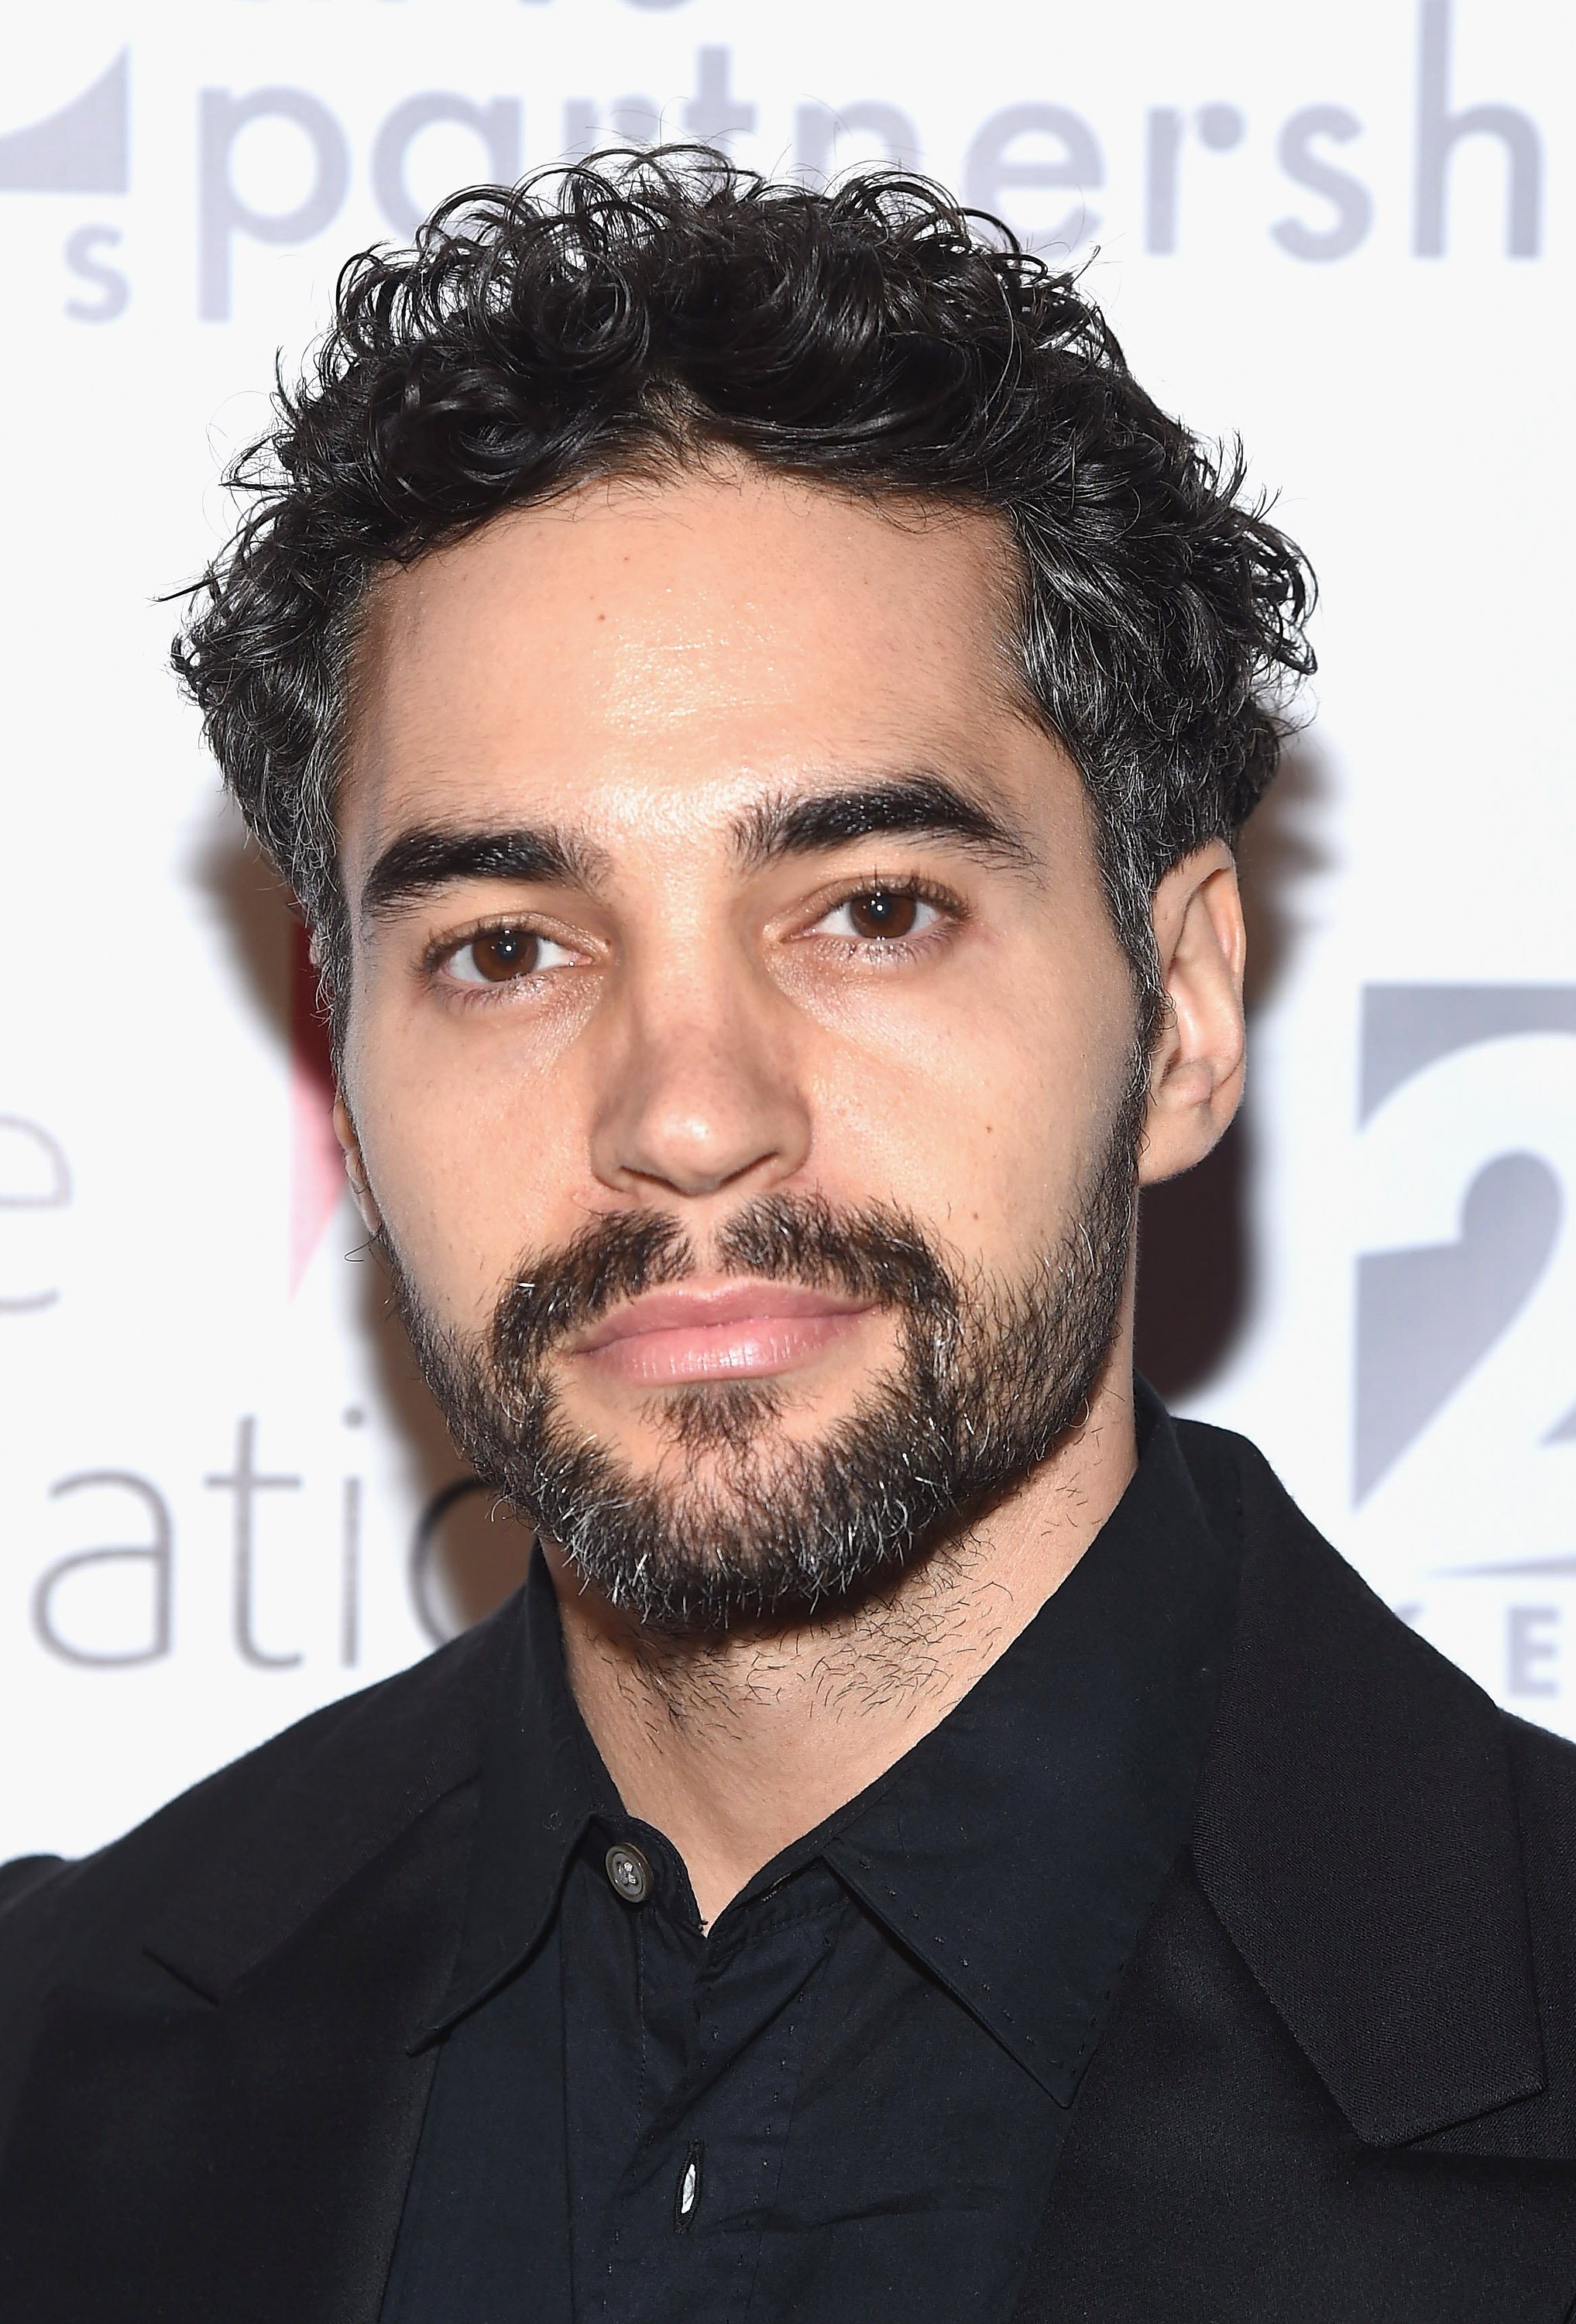 Ramon Rodriguez at the Urban Arts Partnership 25th Anniversary Benefit hosted at Cipriani Wall Street in New York City, NY, on March 15, 2017. | Source: Getty Images